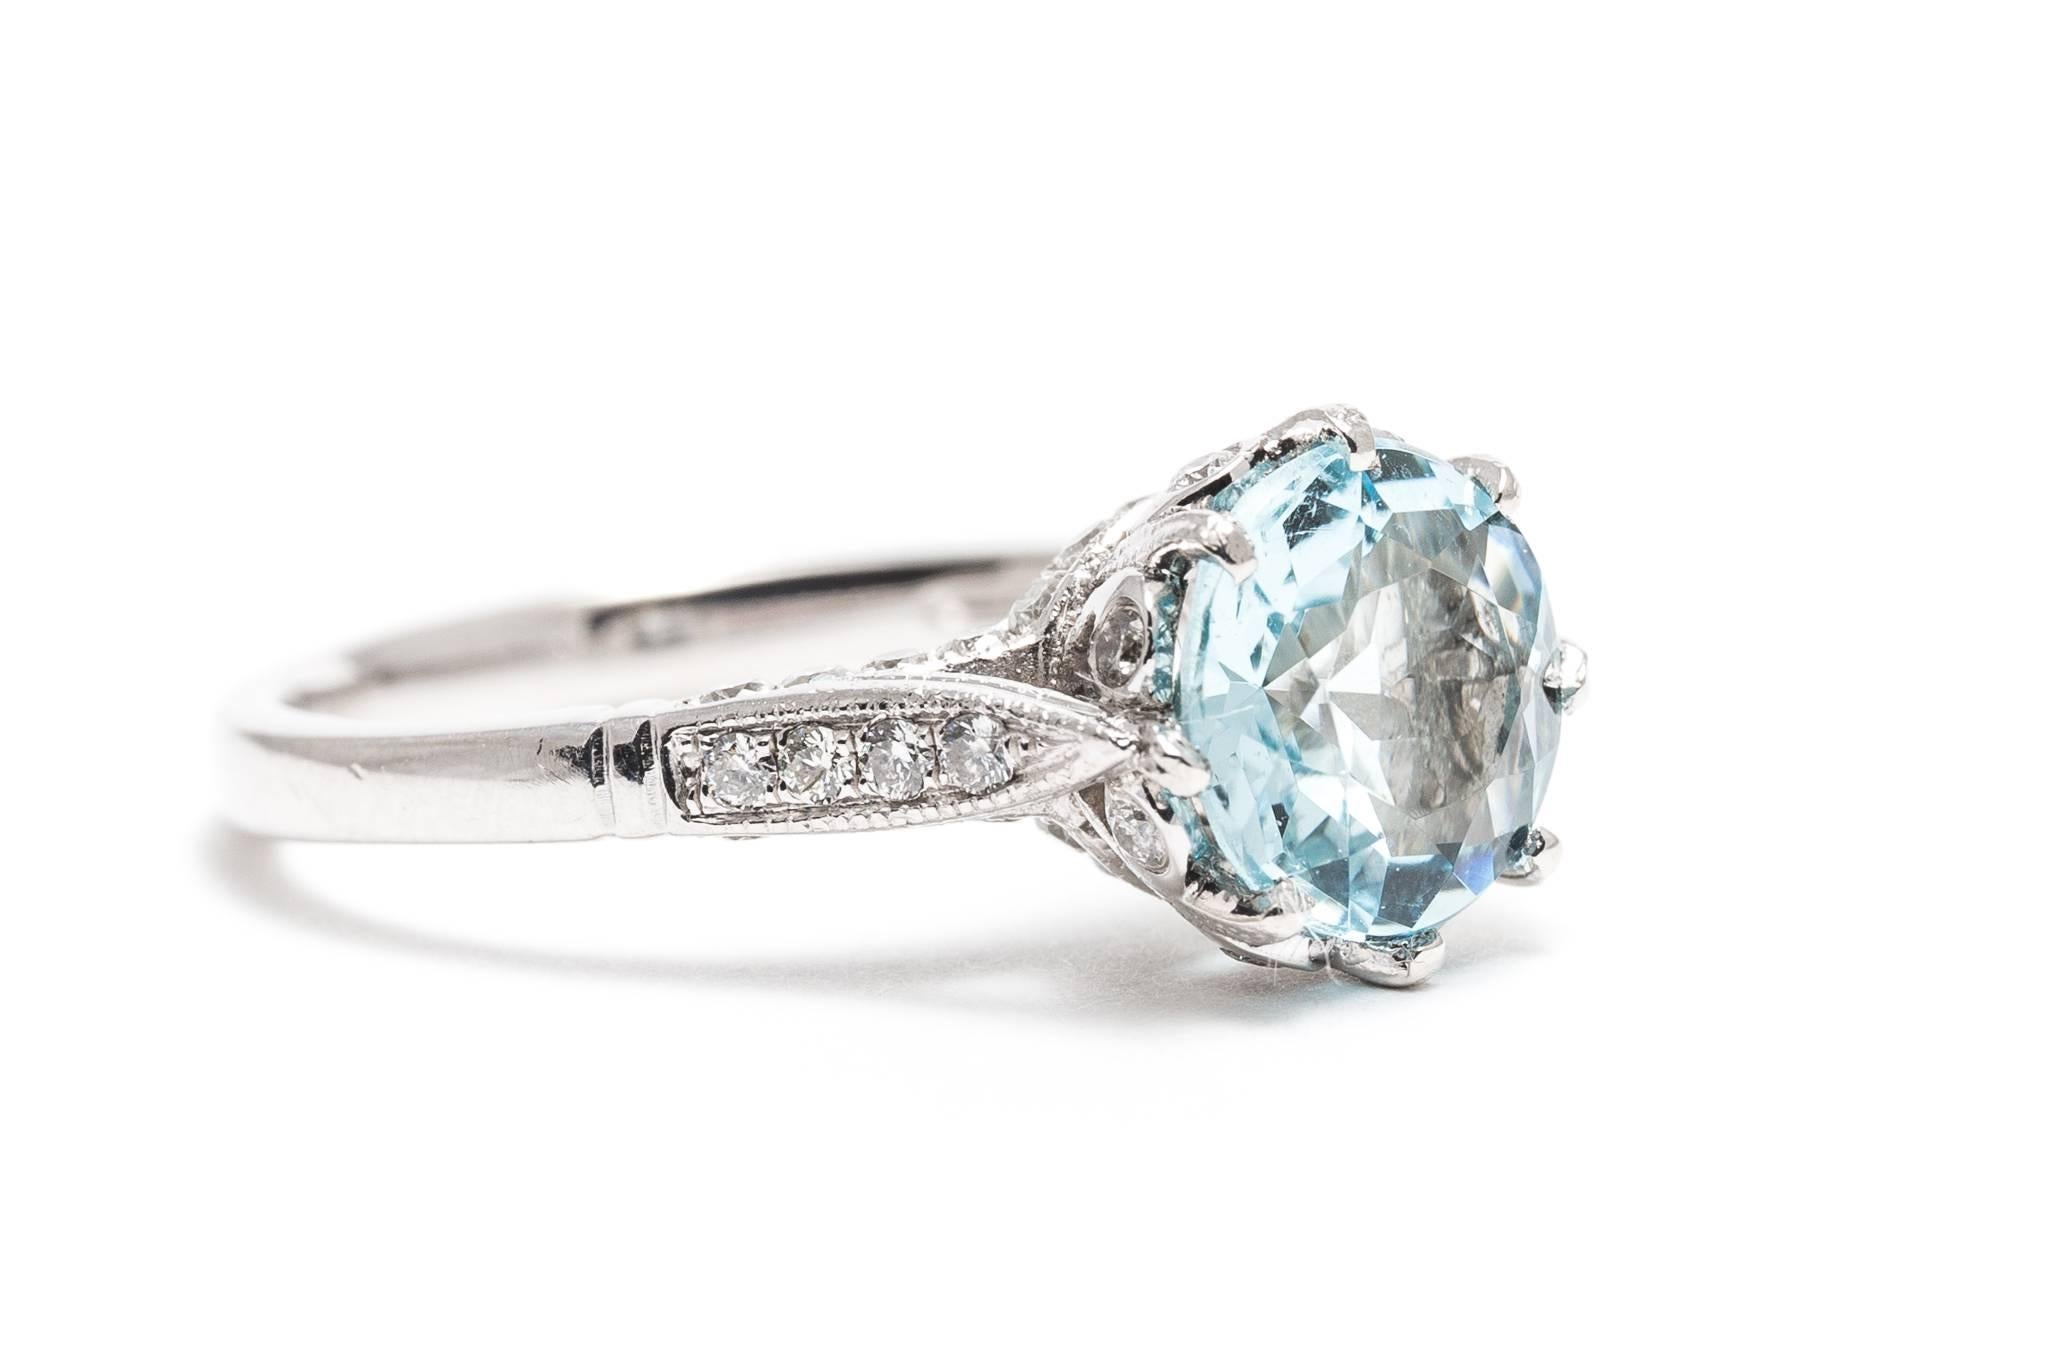 A beautiful aquamarine and diamond ring in luxurious platinum.  Centered by a beautiful vivid ocean blue aquamarine weighing 2 carats, this ring features a beautifully hand crafted and diamond set mounting in luxurious platinum.  

Of superb VVS